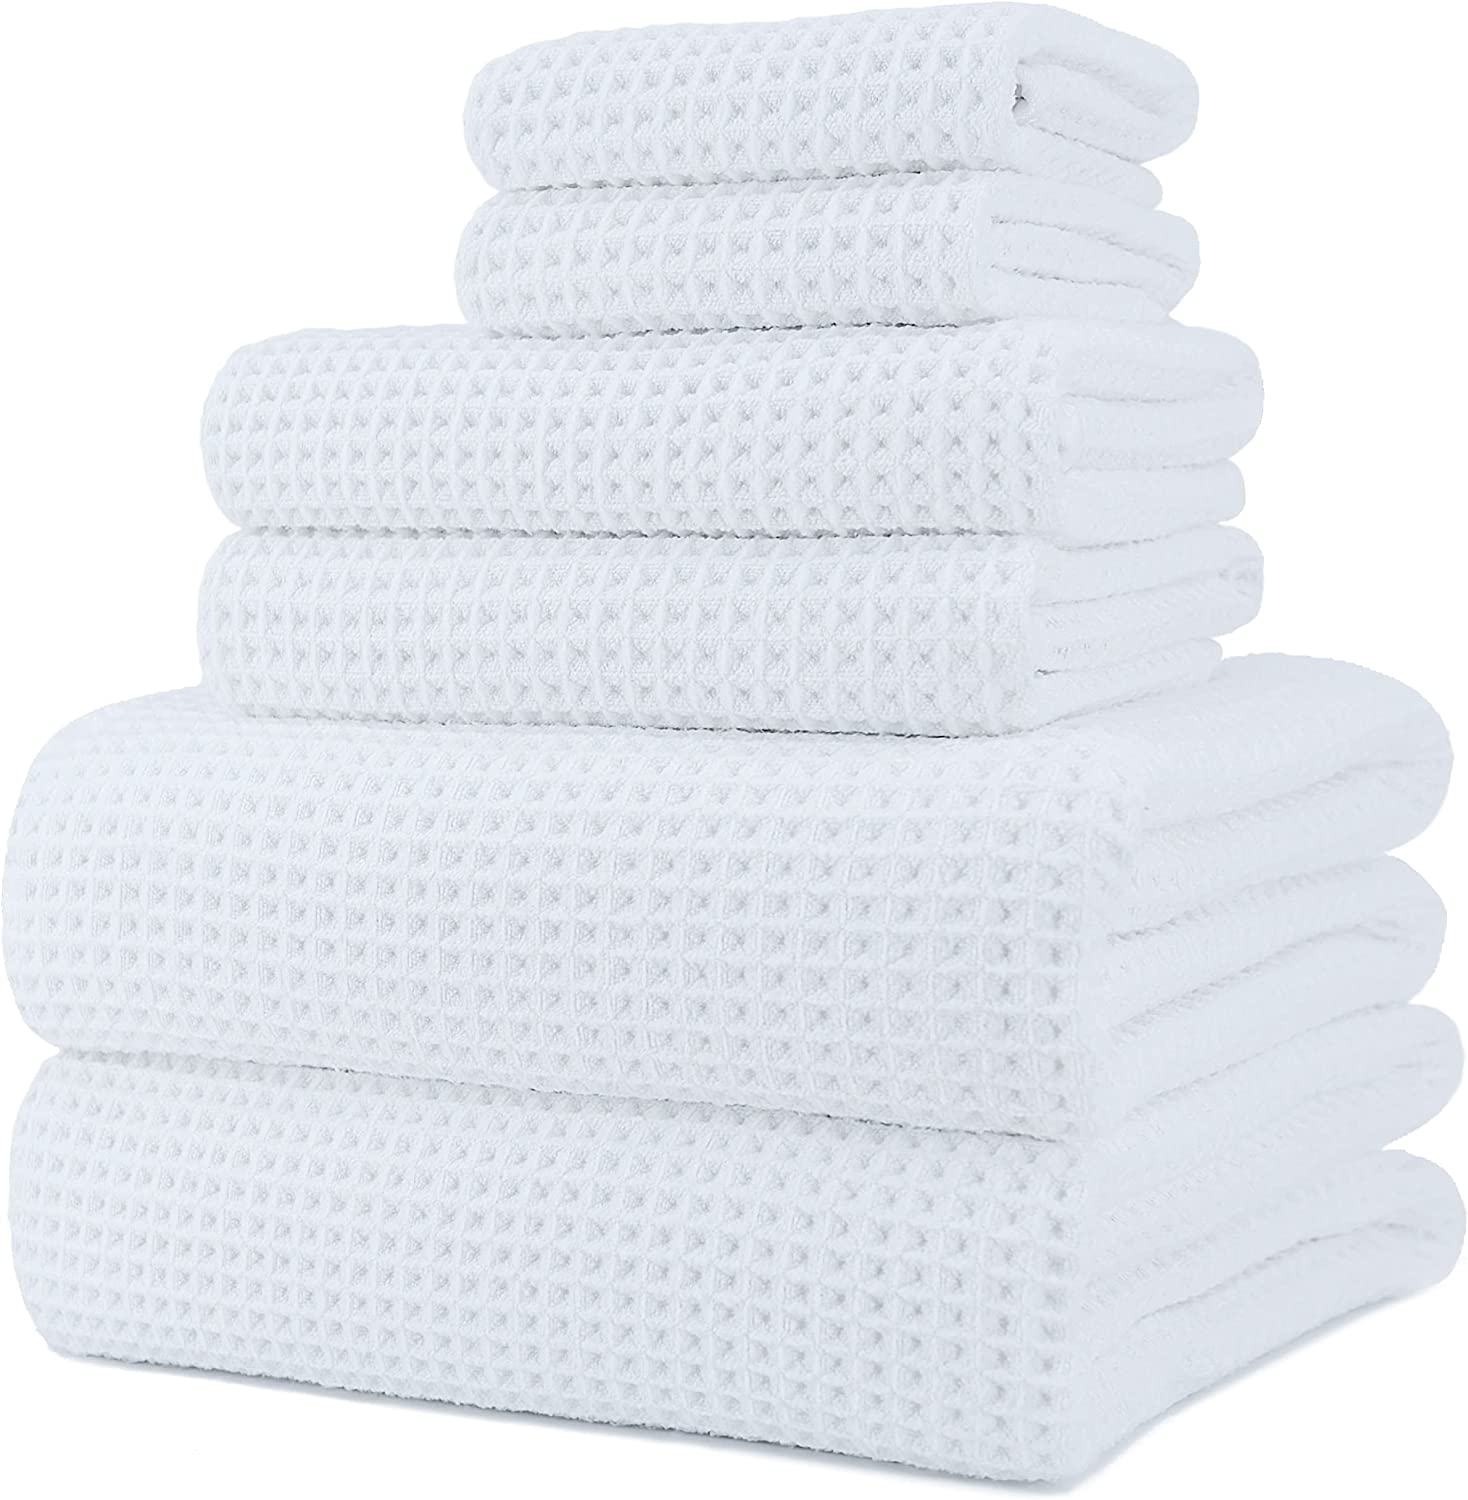 POLYTE Microfiber Oversize Quick Dry Lint Free Bath Towel, 60 x 30 in, 4  Pack (Blue, Waffle Weave)